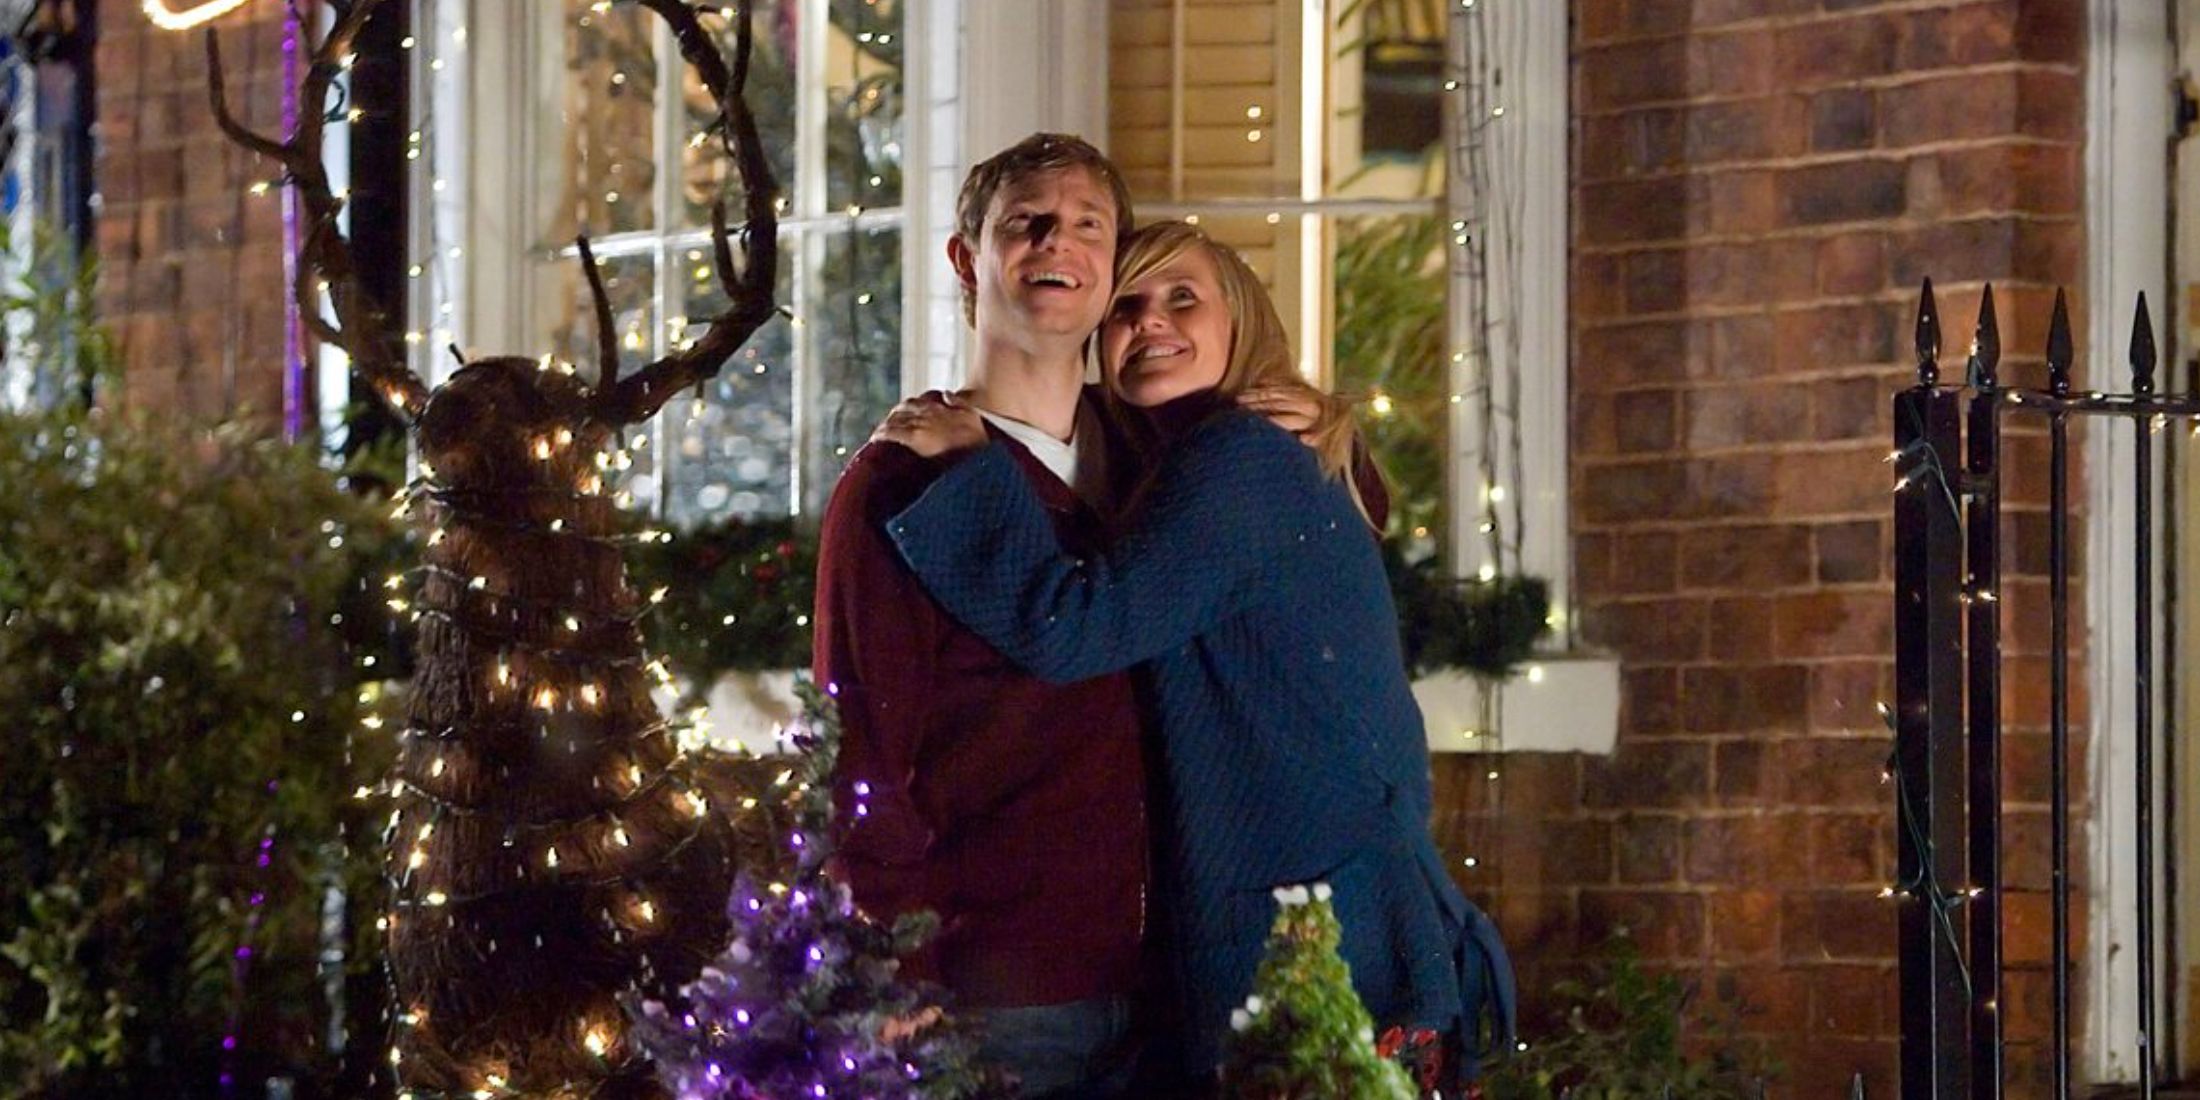 Paul and Jennifer hug surrounded by fairy lights in Nativity